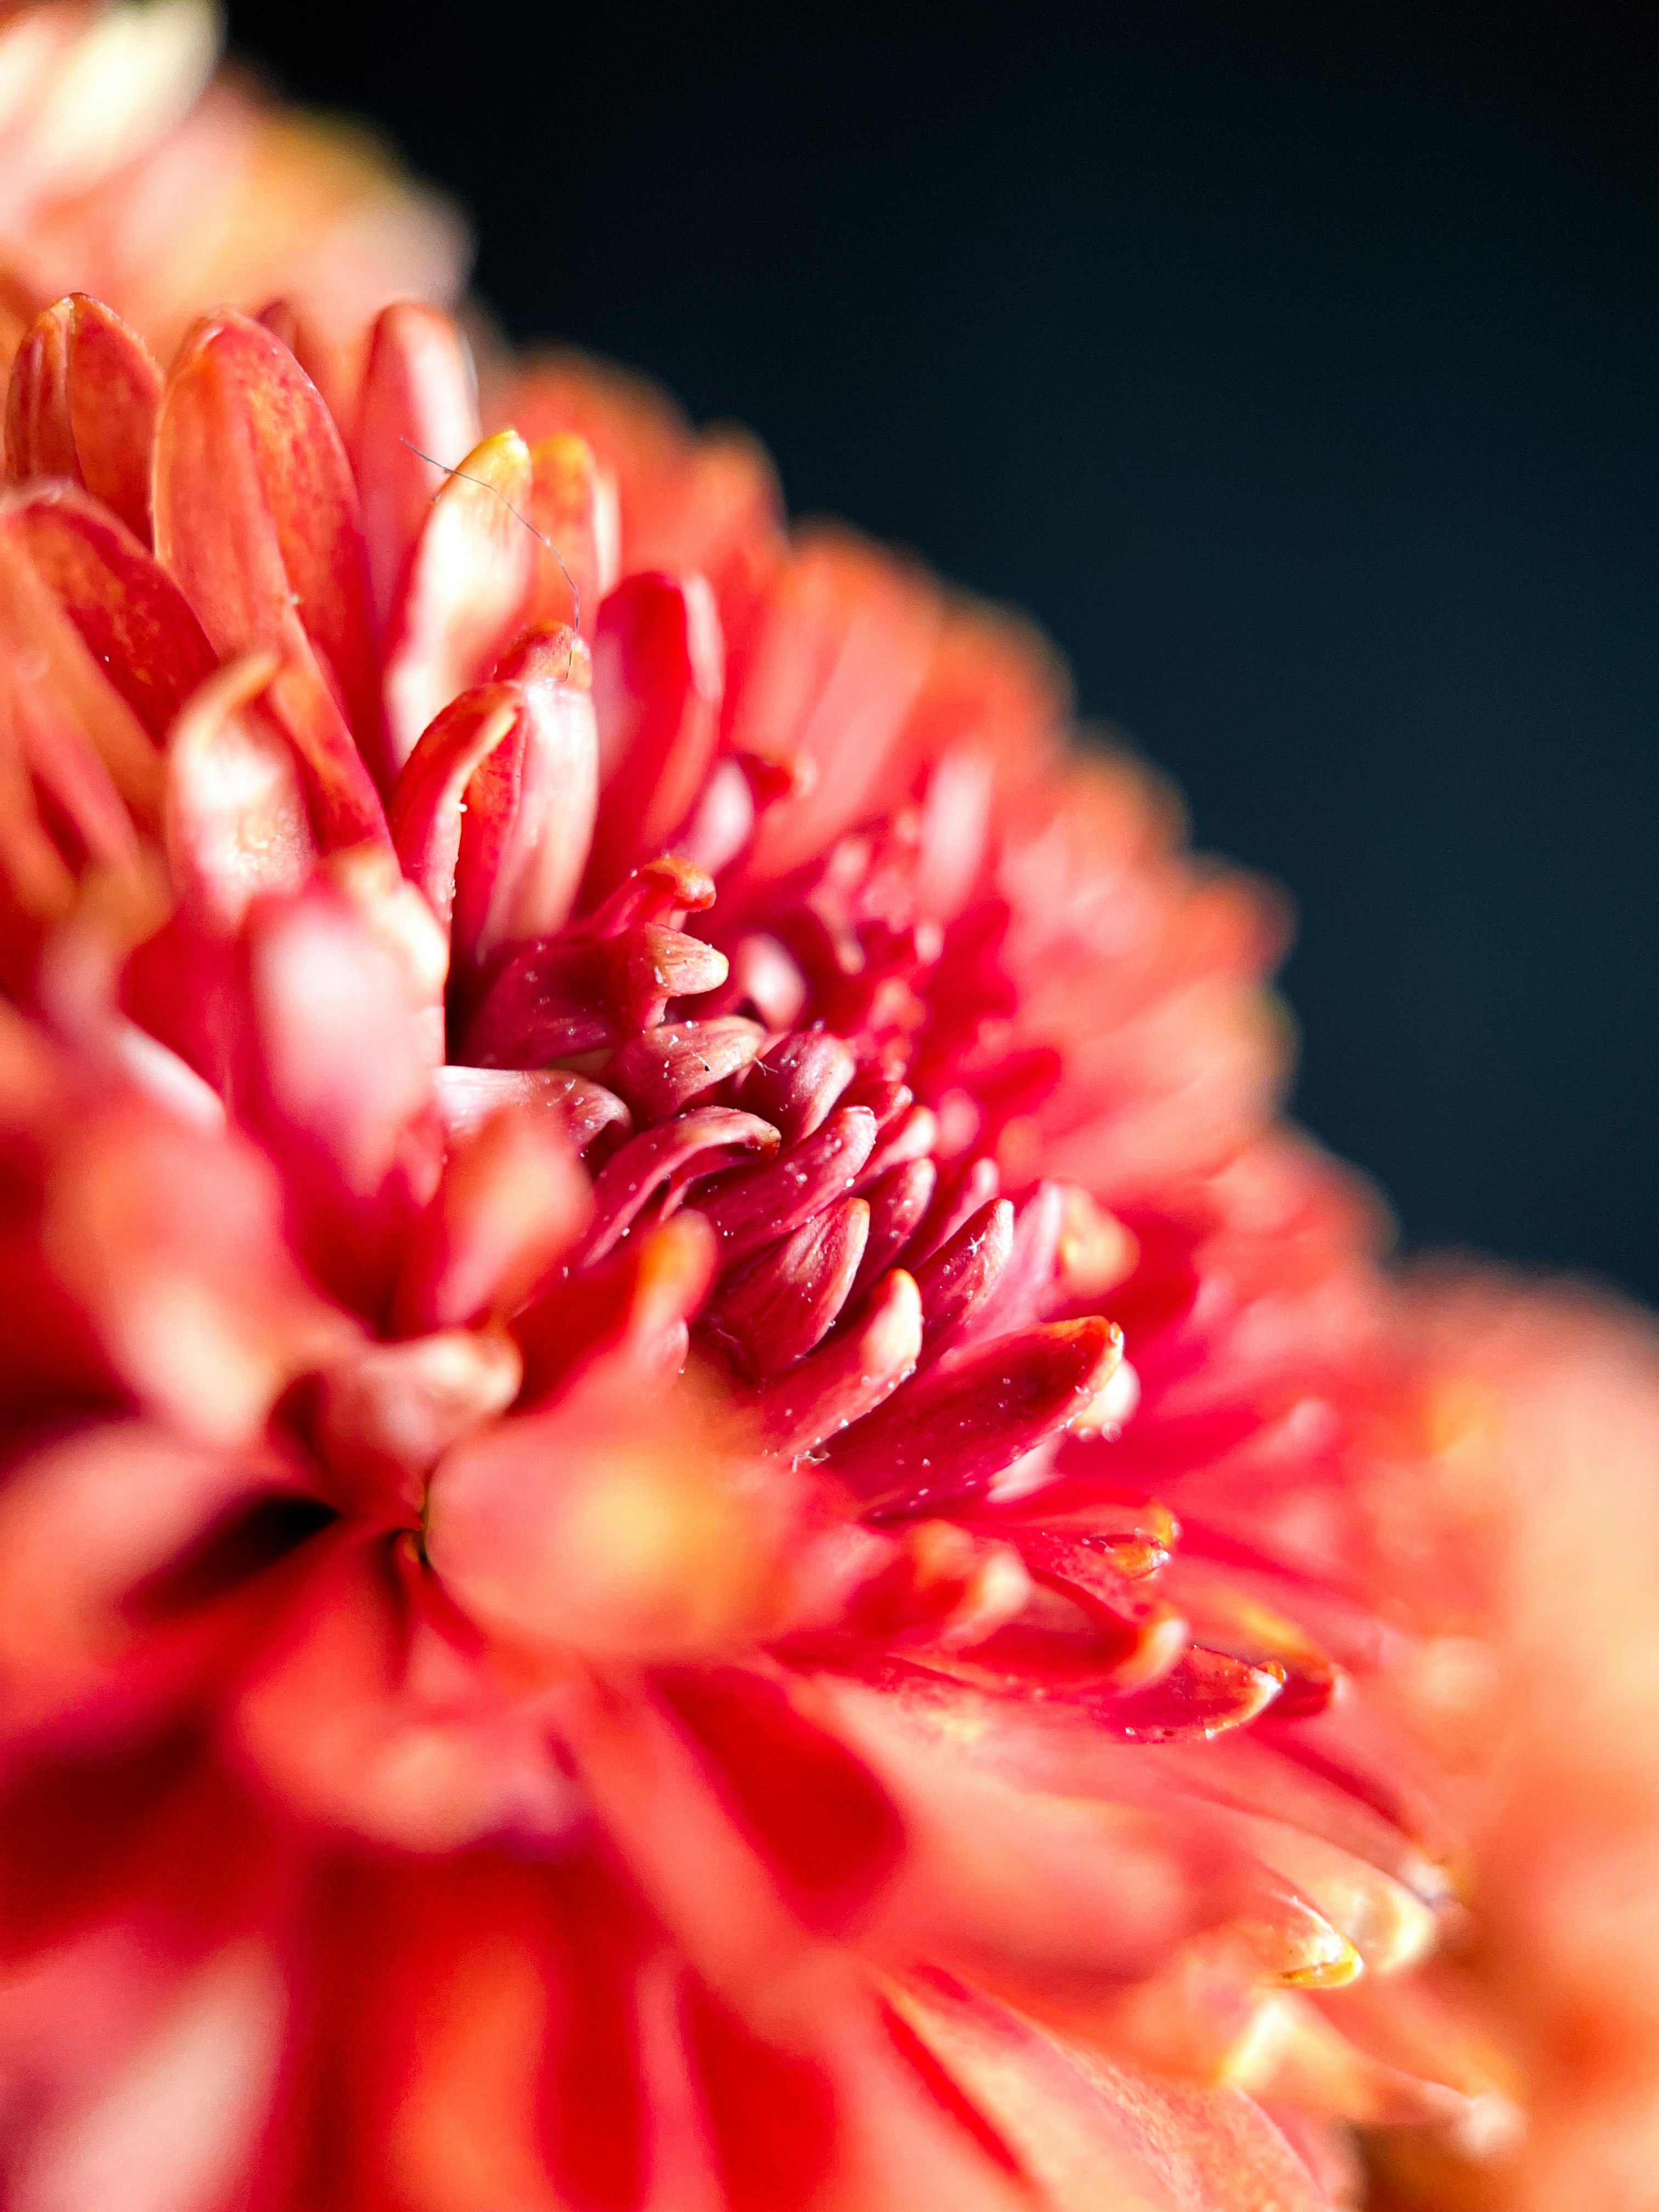 red and white flower in close up photography